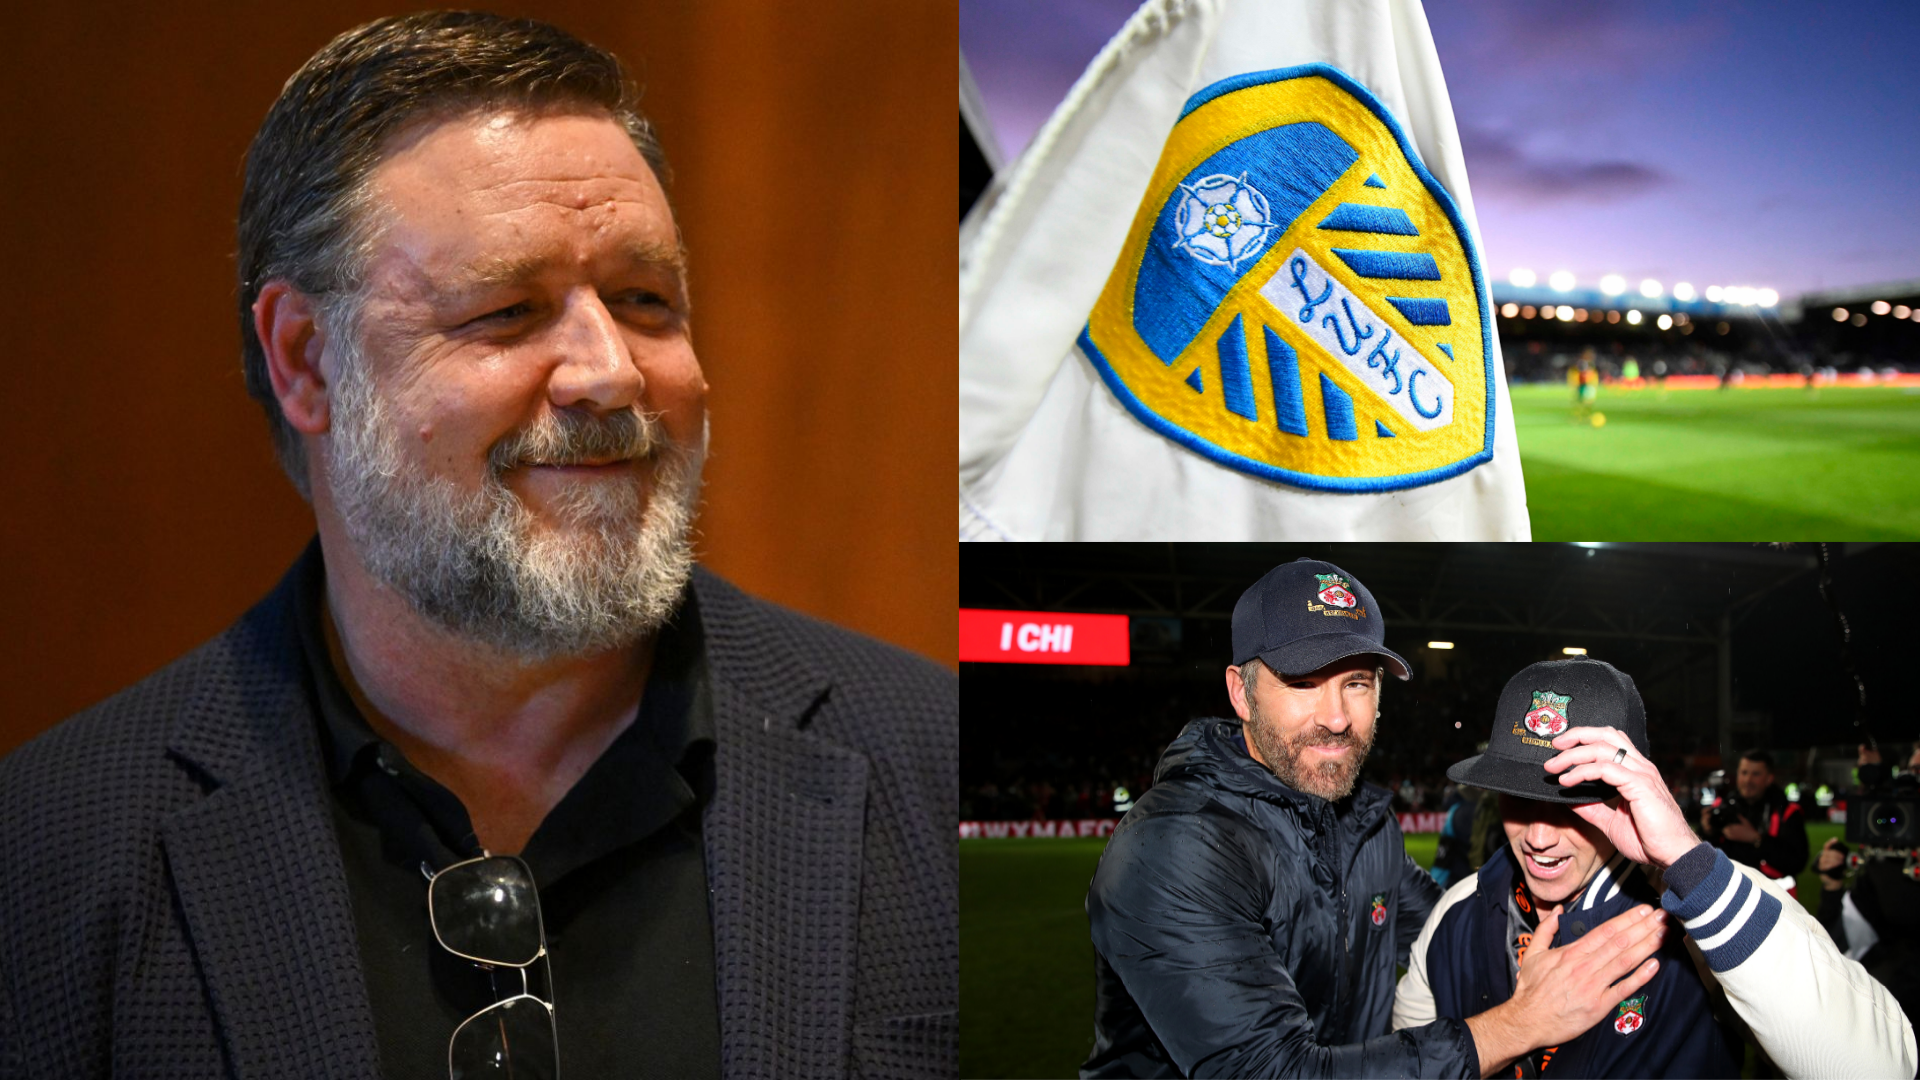 Revealed: Gladiator star Russell Crowe ‘a phone call’ from buying Leeds before fellow Hollywood stars Ryan Reynolds & Rob McElhenney jumped on investment bandwagon at Wrexham